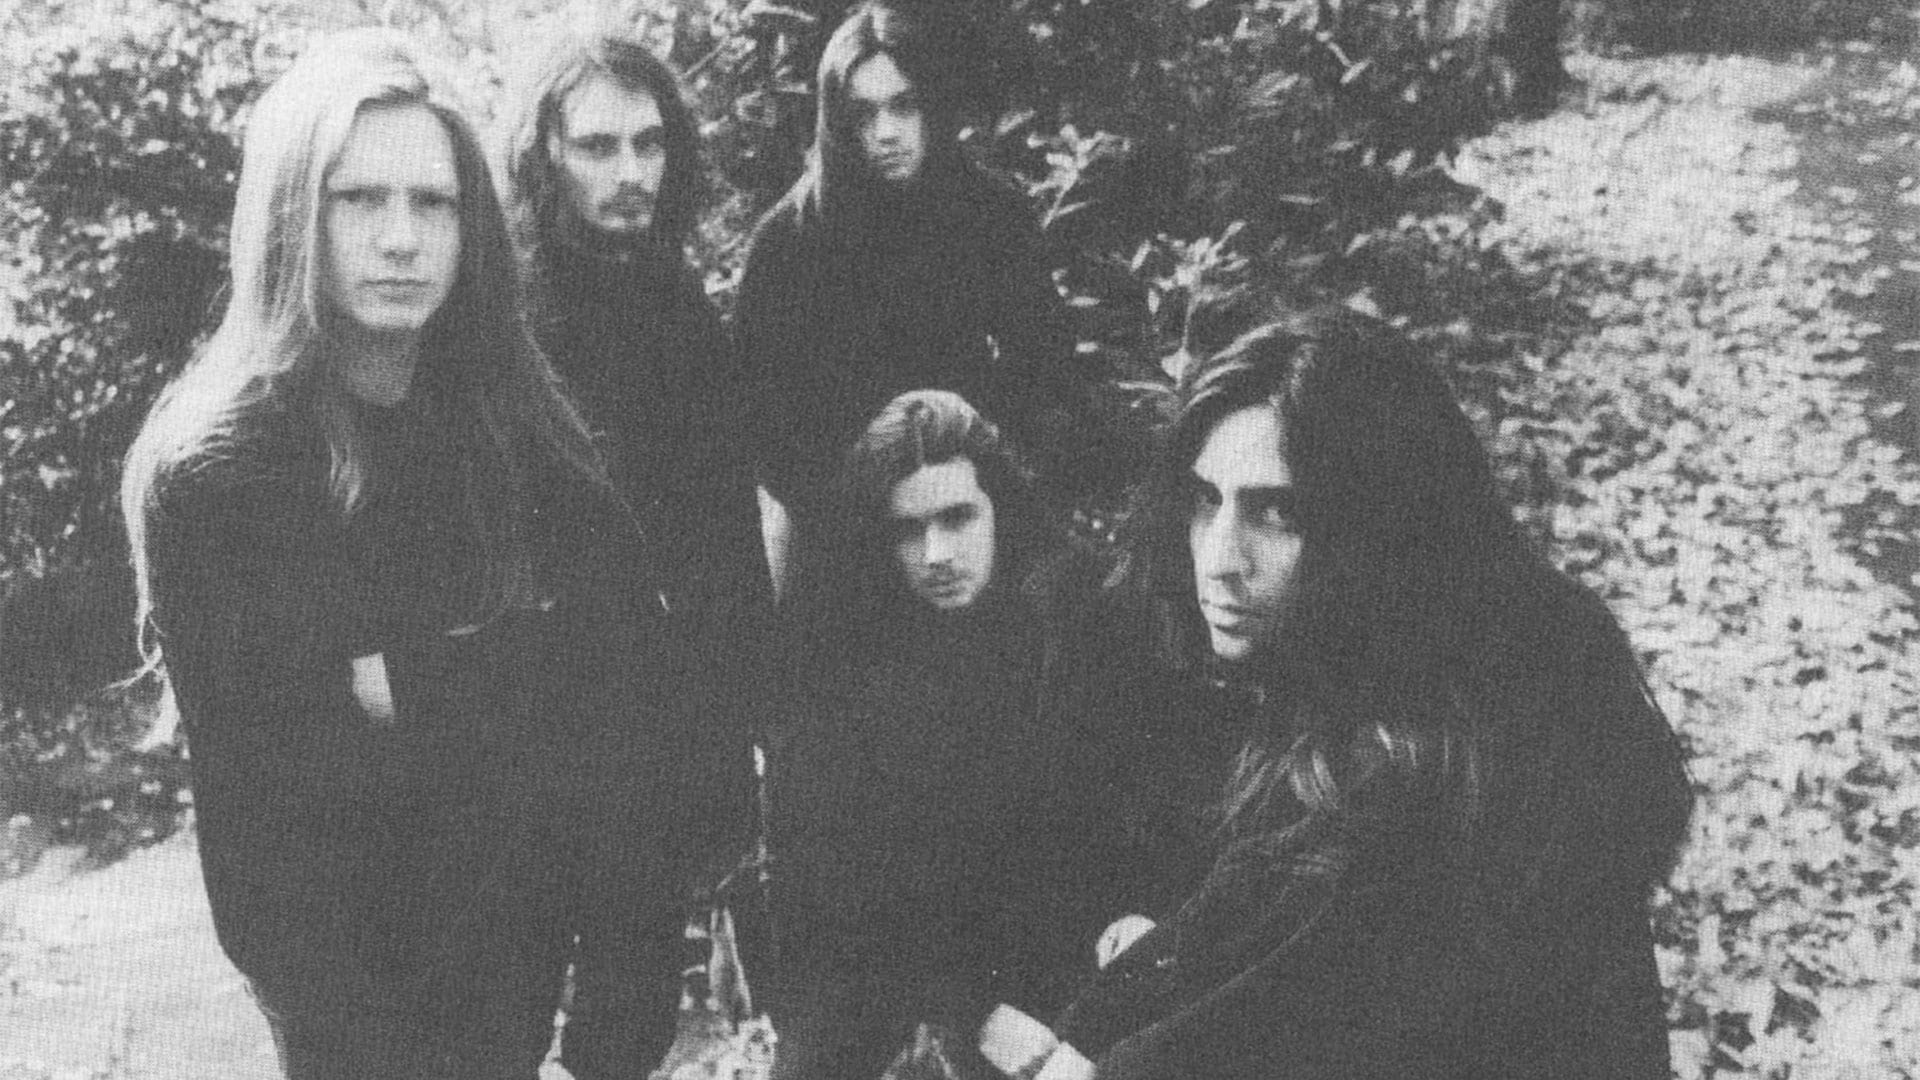 27 Years Ago: MY DYING BRIDE finish recording Towards the Sinister first demo